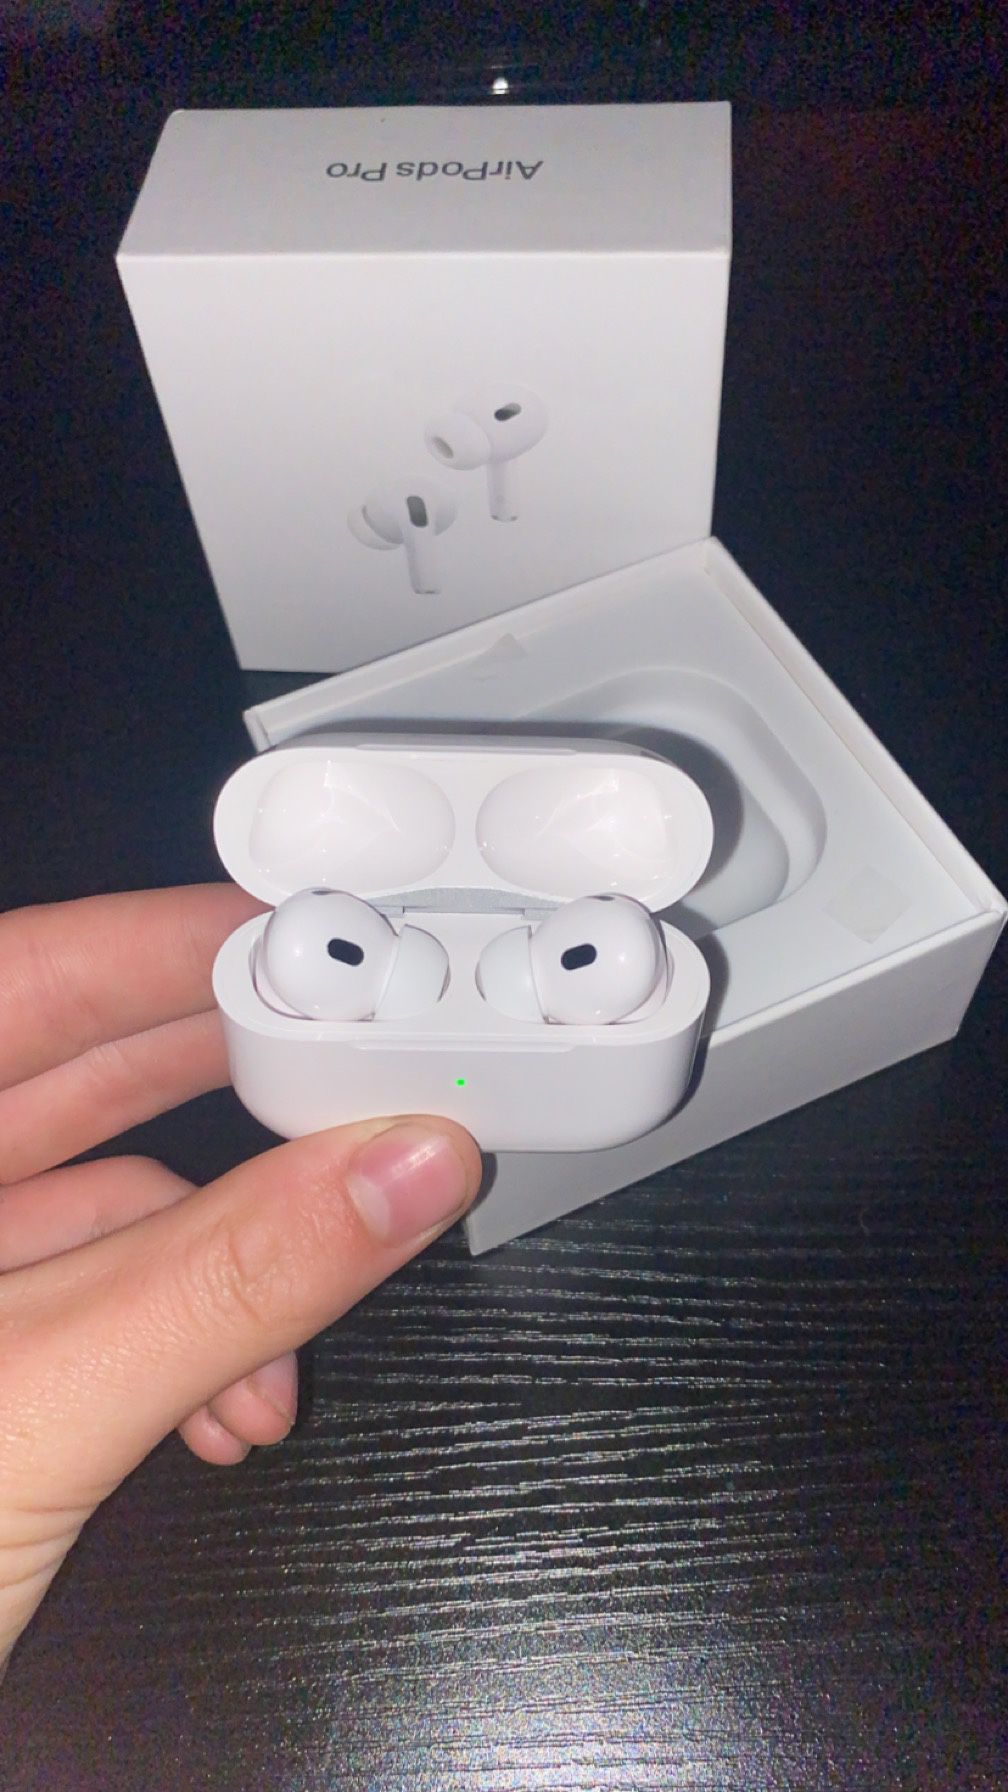 Apple AirPod Pro 2nd generation for Sale in Louisville, KY - OfferUp